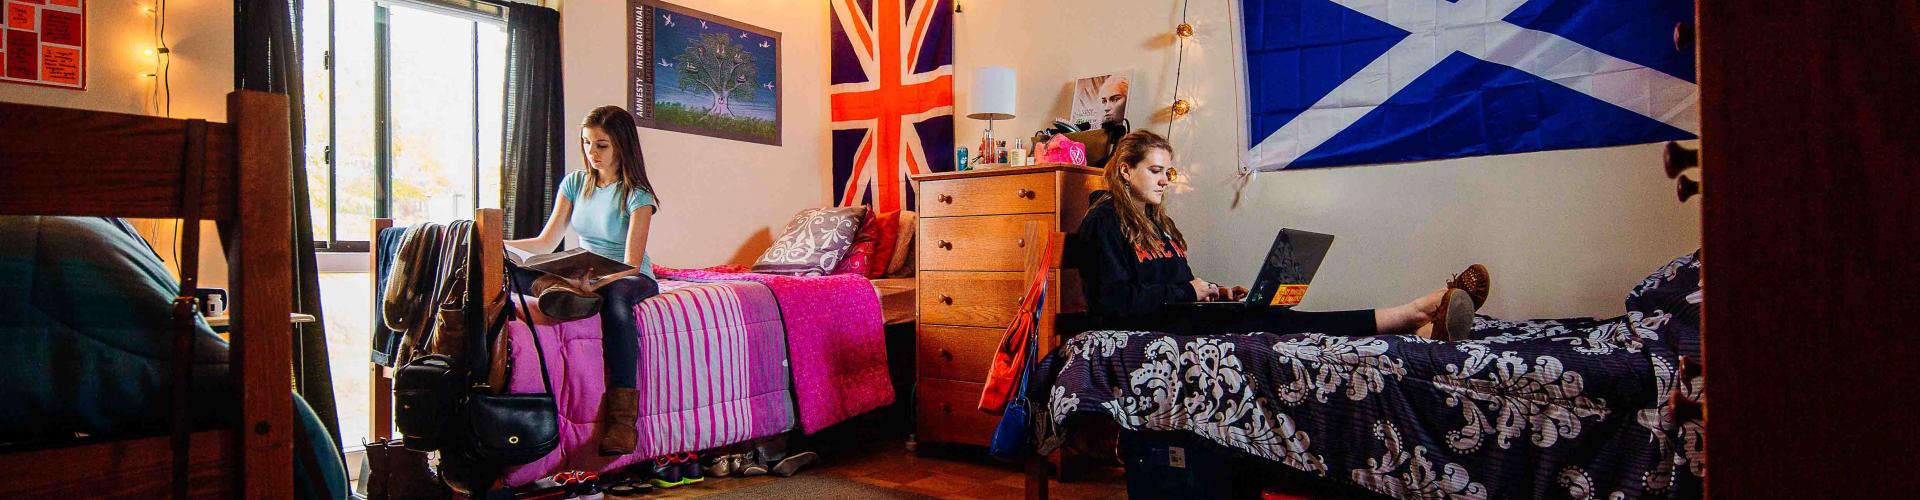 Two students in their dorm with country flags on the walls